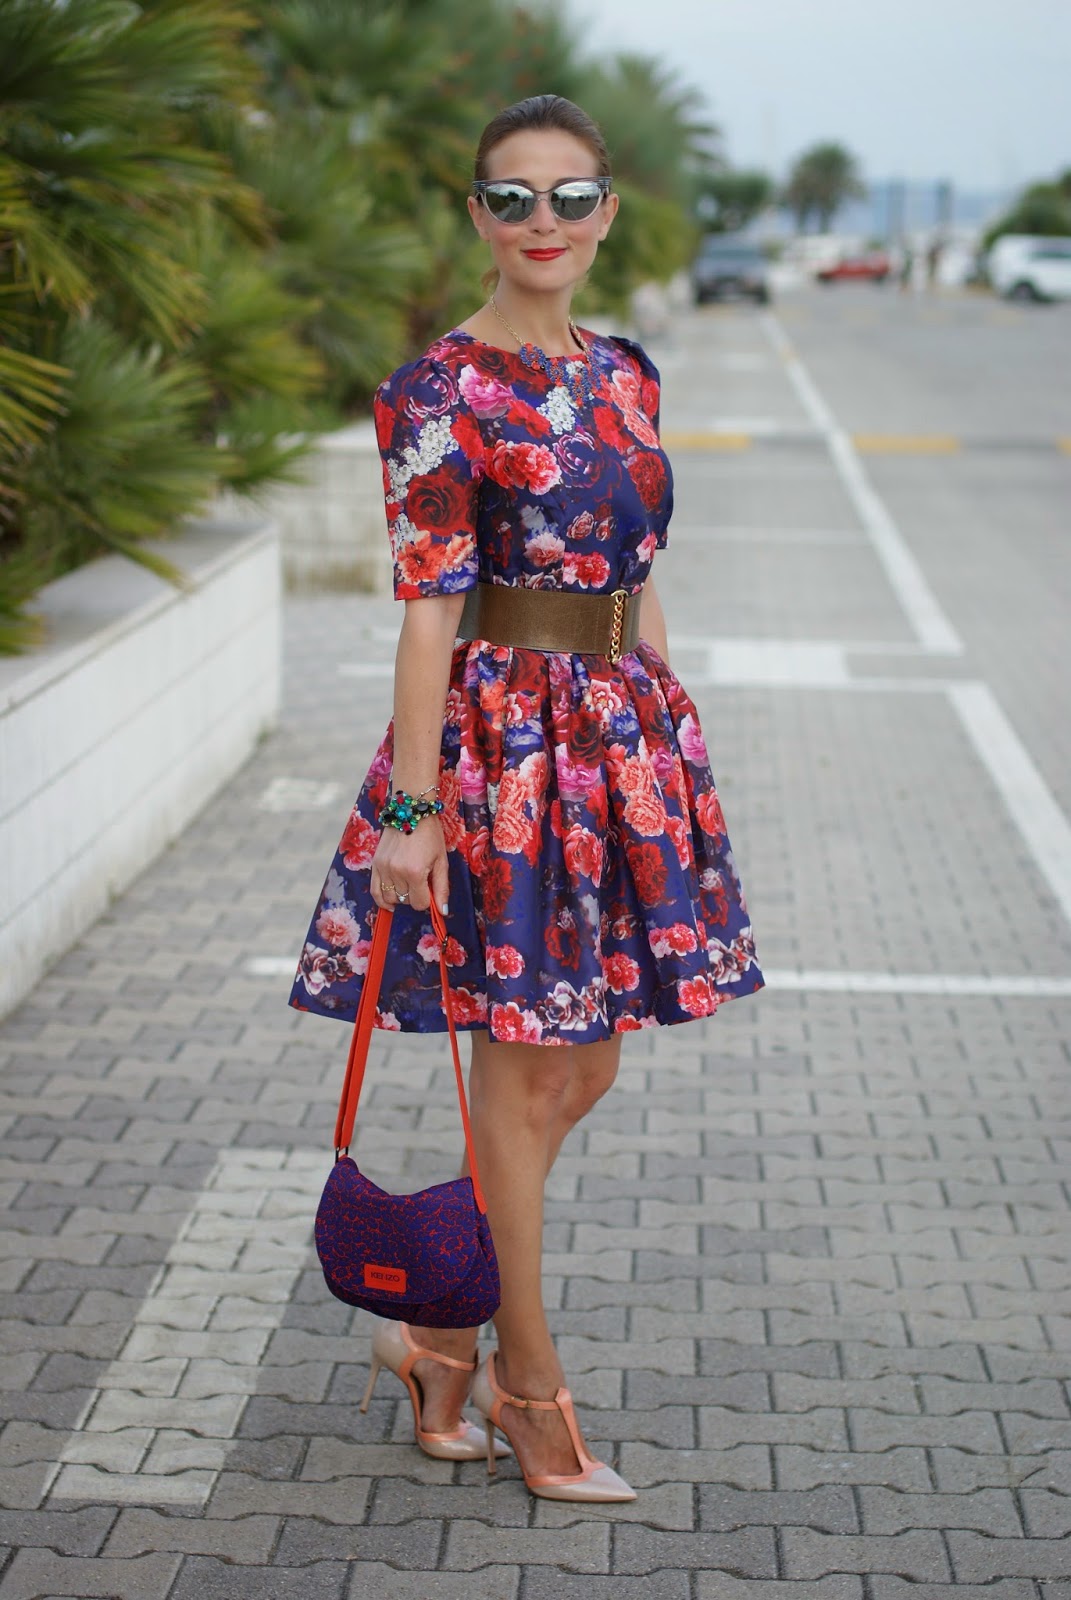 Blooming roses dress | Fashion and Cookies - fashion and beauty blog